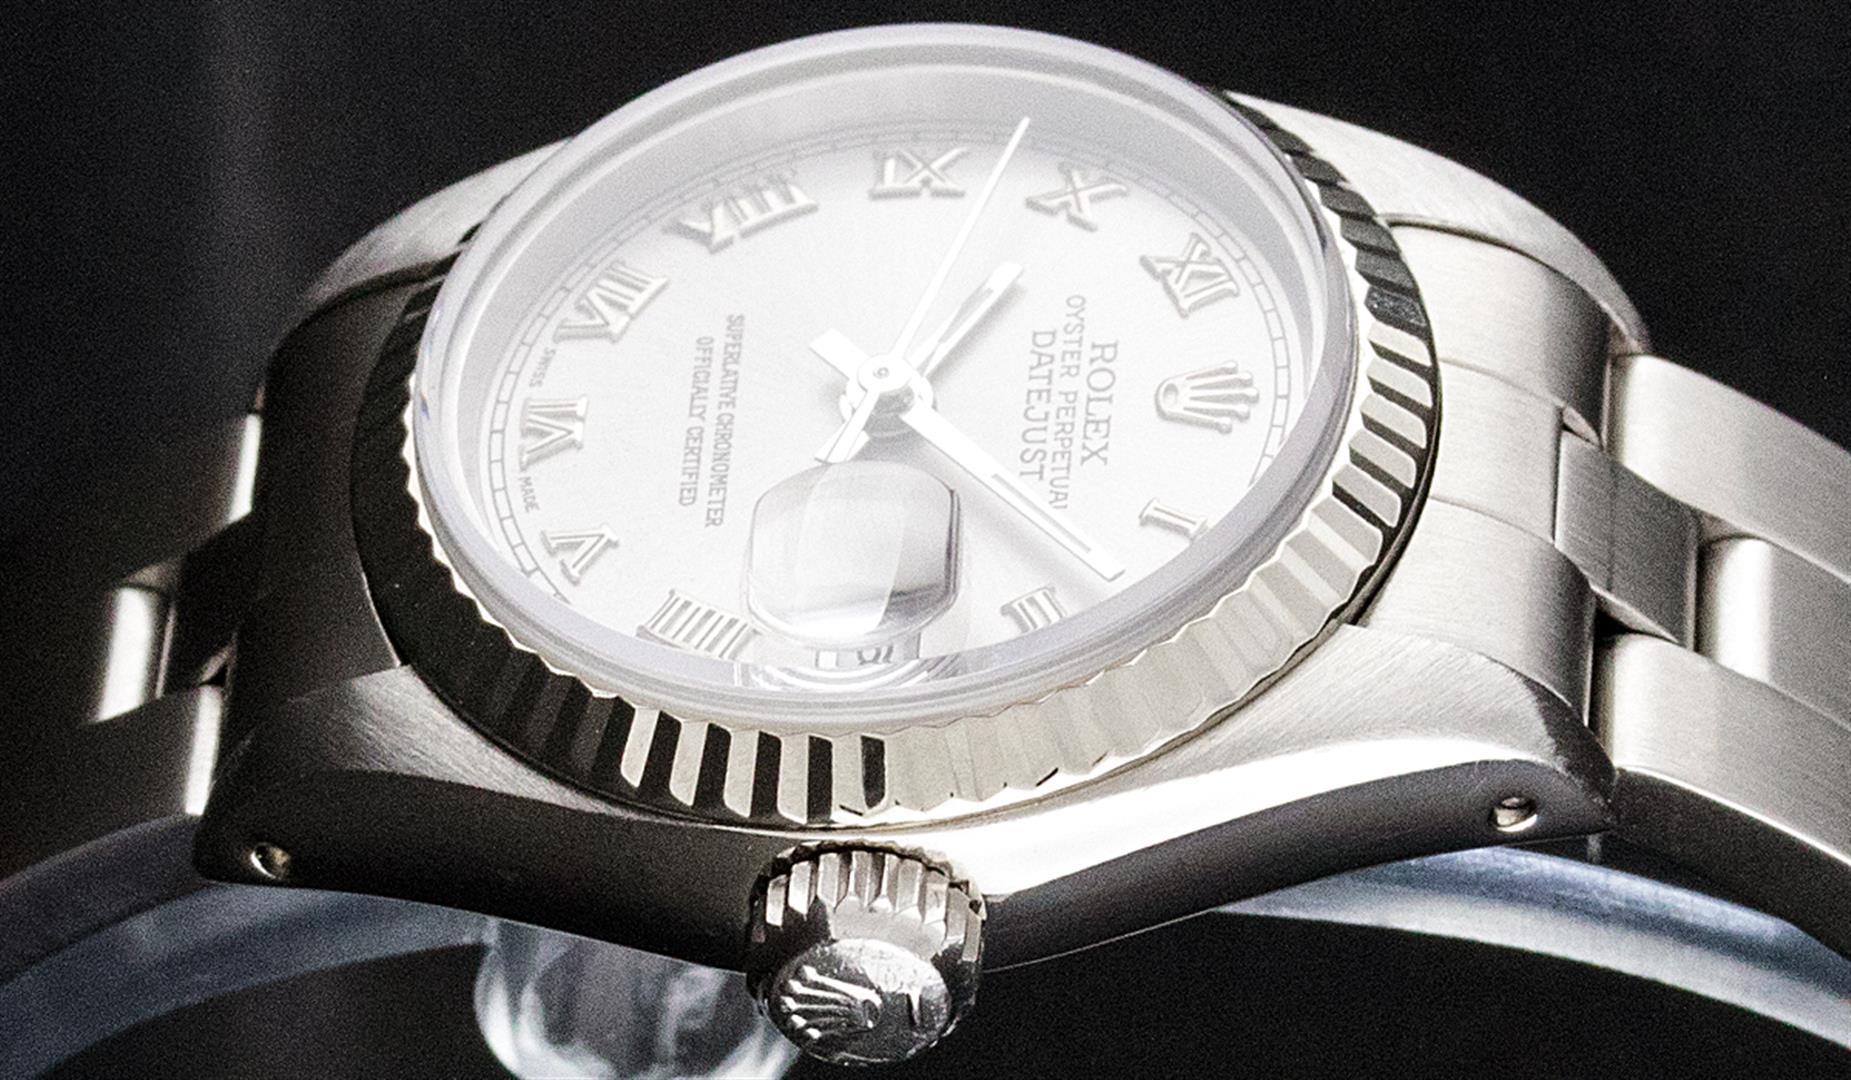 Rolex Ladies Stainless Steel Slate Grey 26MM Oyster Band Datejust Wristwatch